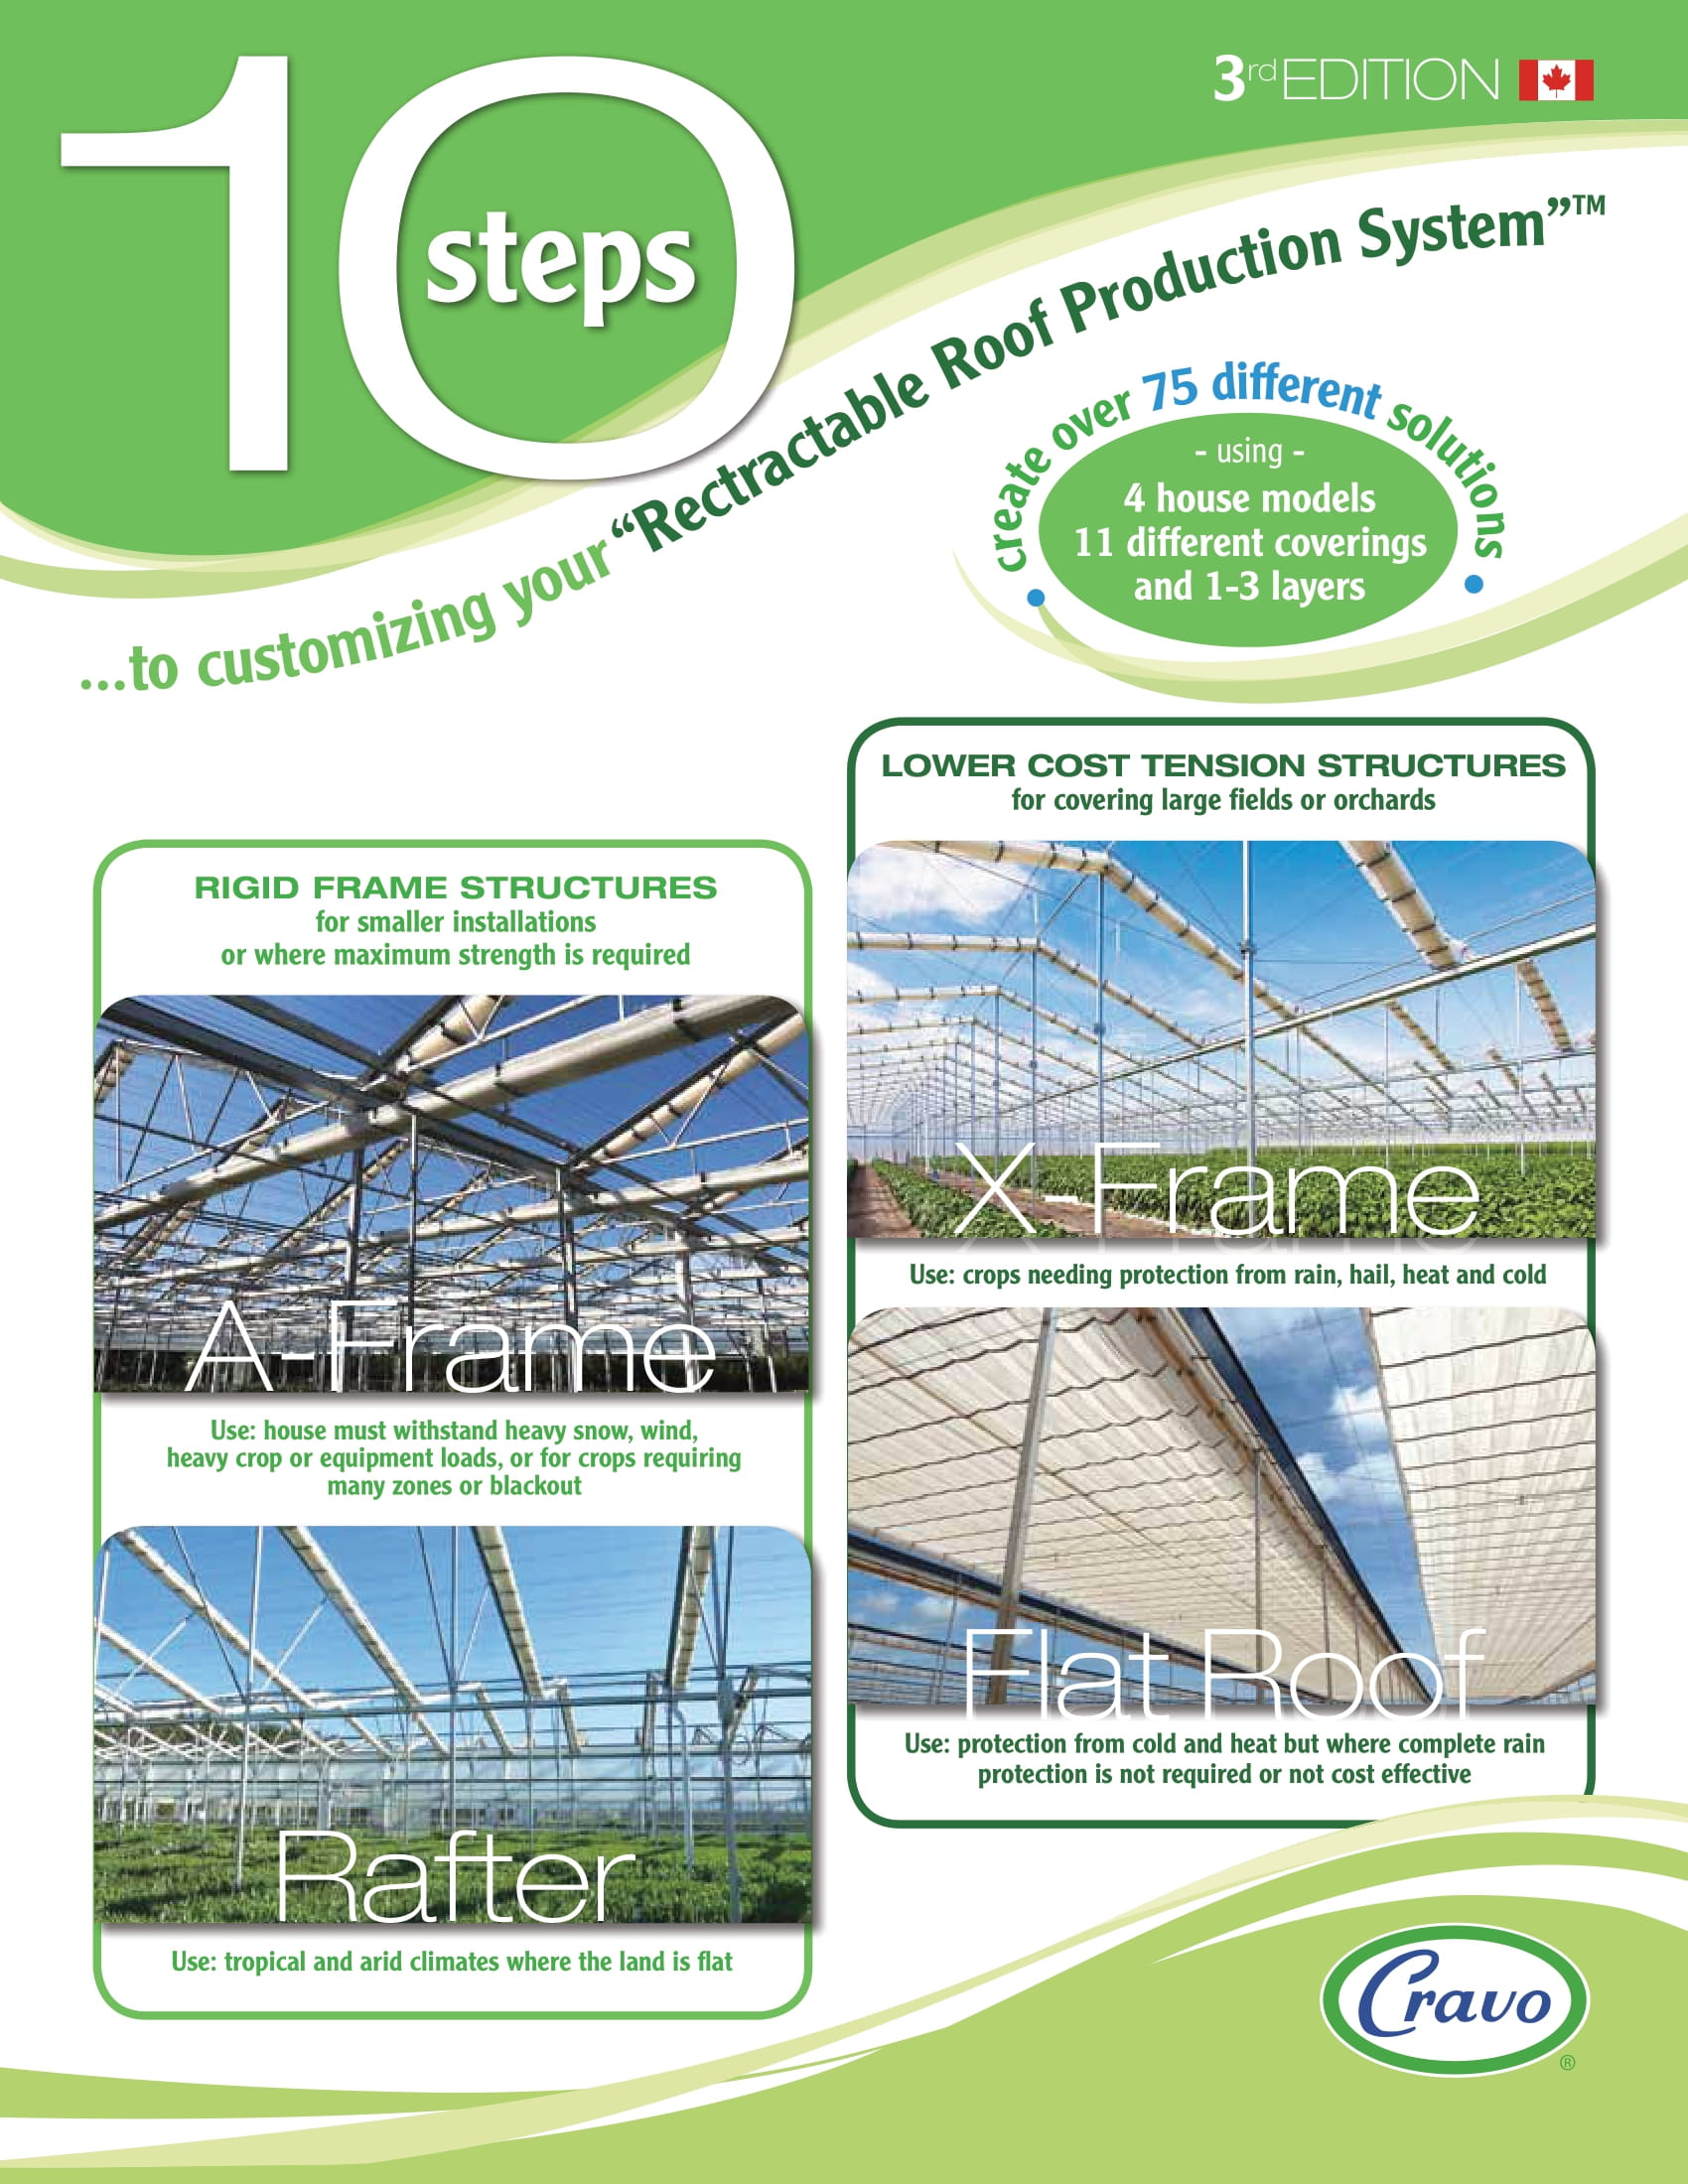 The 10 steps to create a retractable roof production system